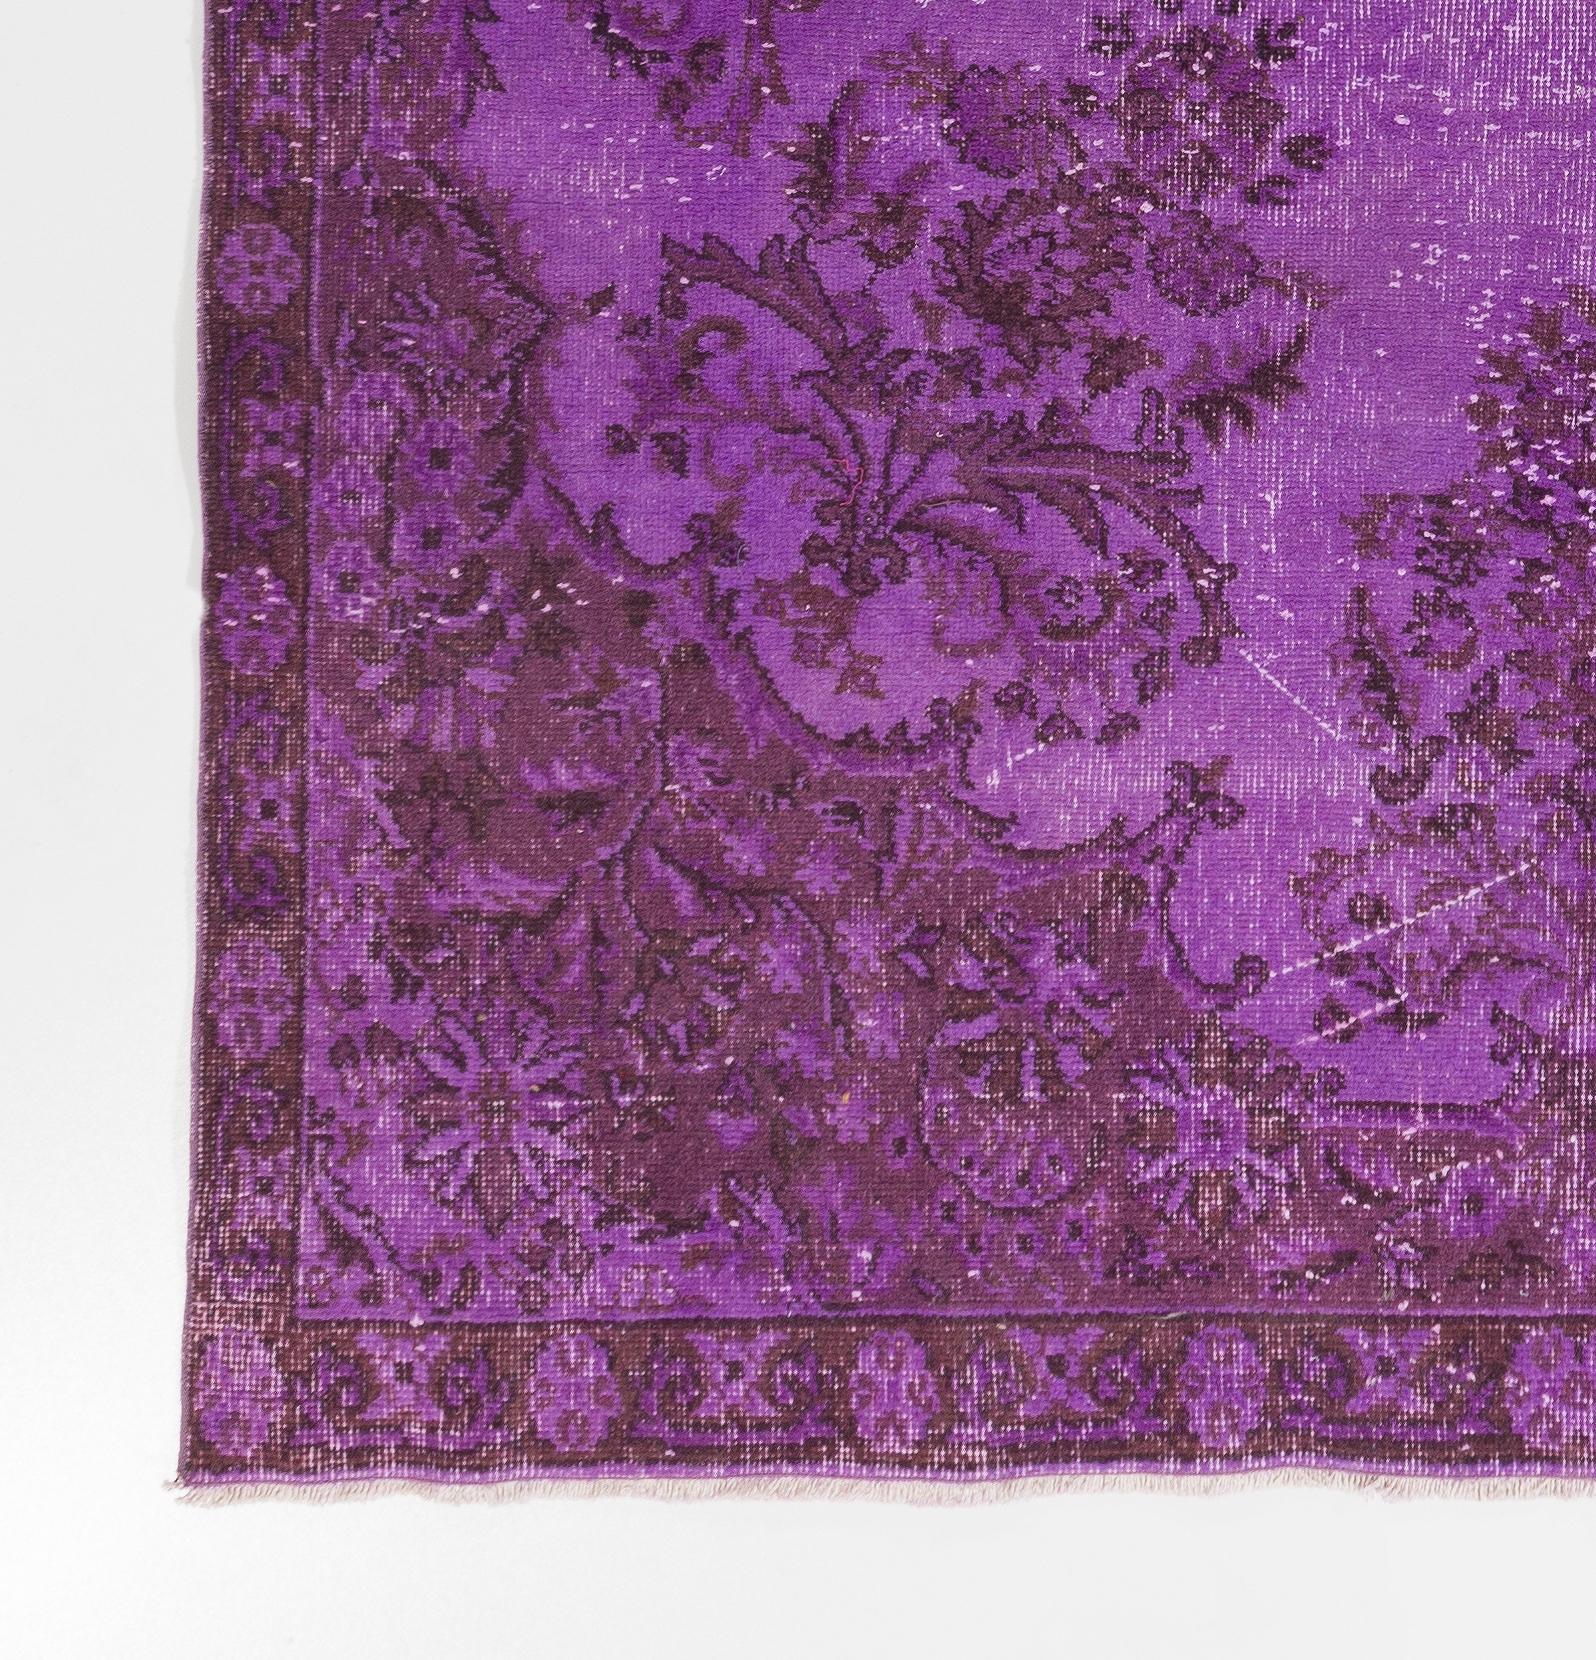 Hand-Knotted 6.2x10.2 Ft Handmade Turkish Rug in Purple. Floral Garden Design Wool Carpet For Sale